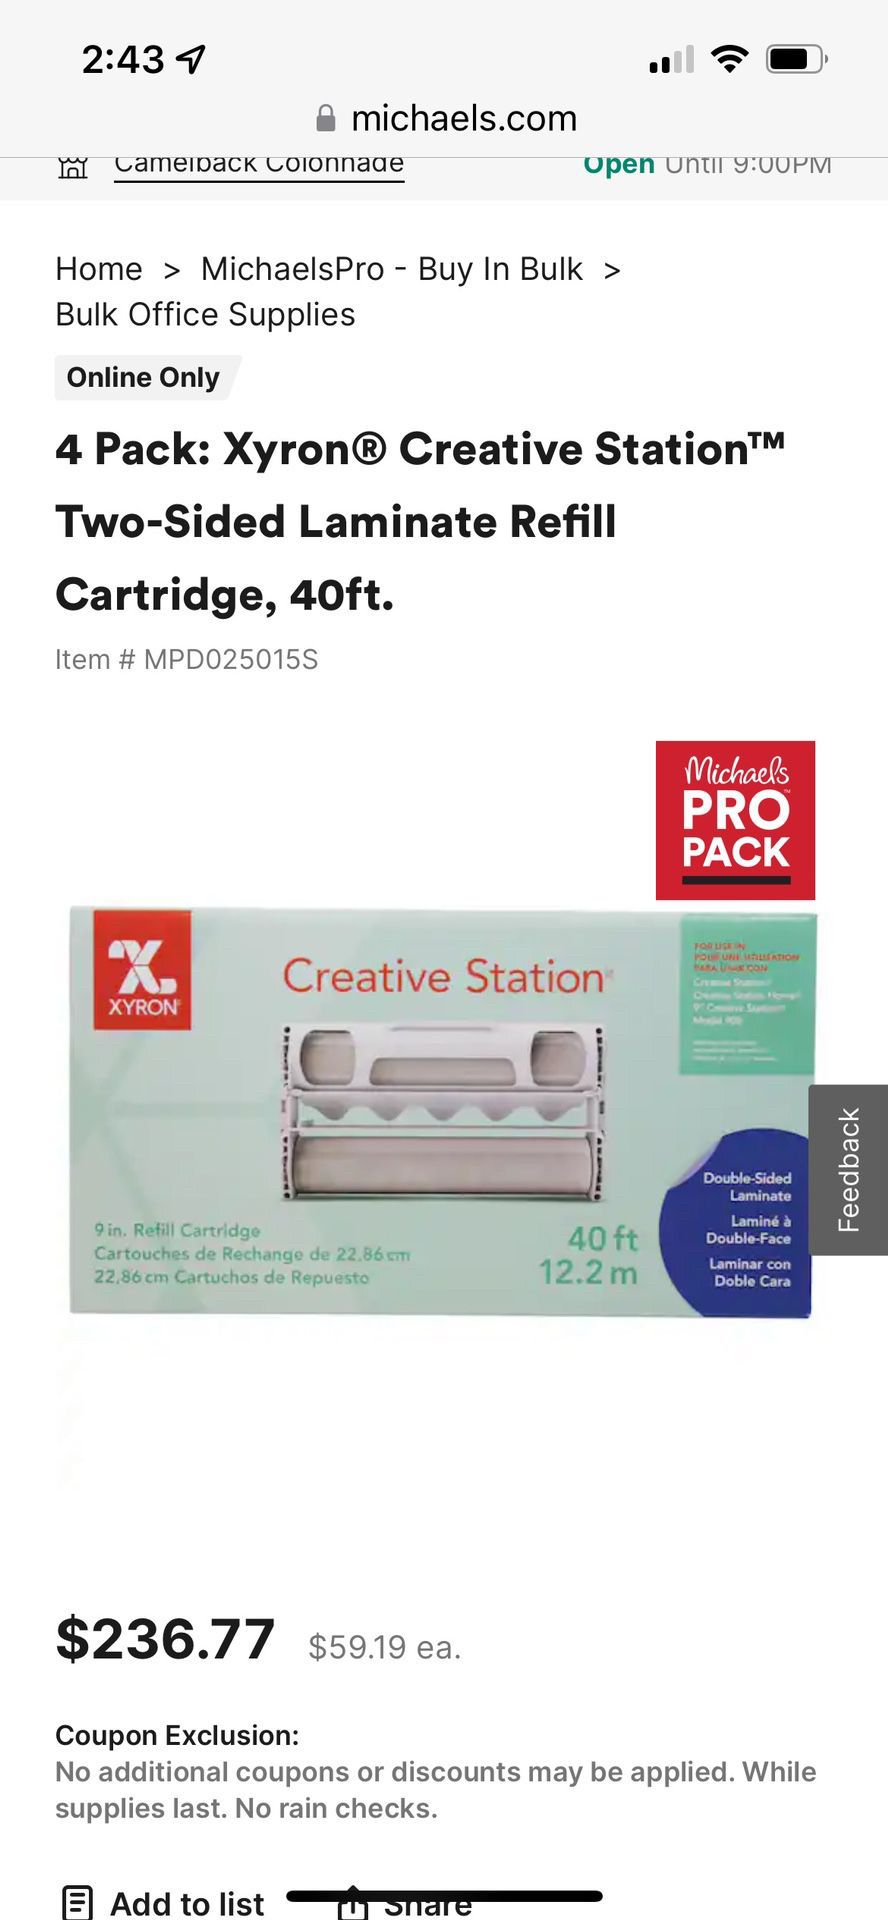 Xyron 5 Creative Station Double-Sided Refill Adhesive Cartridge 18 ft - NEW